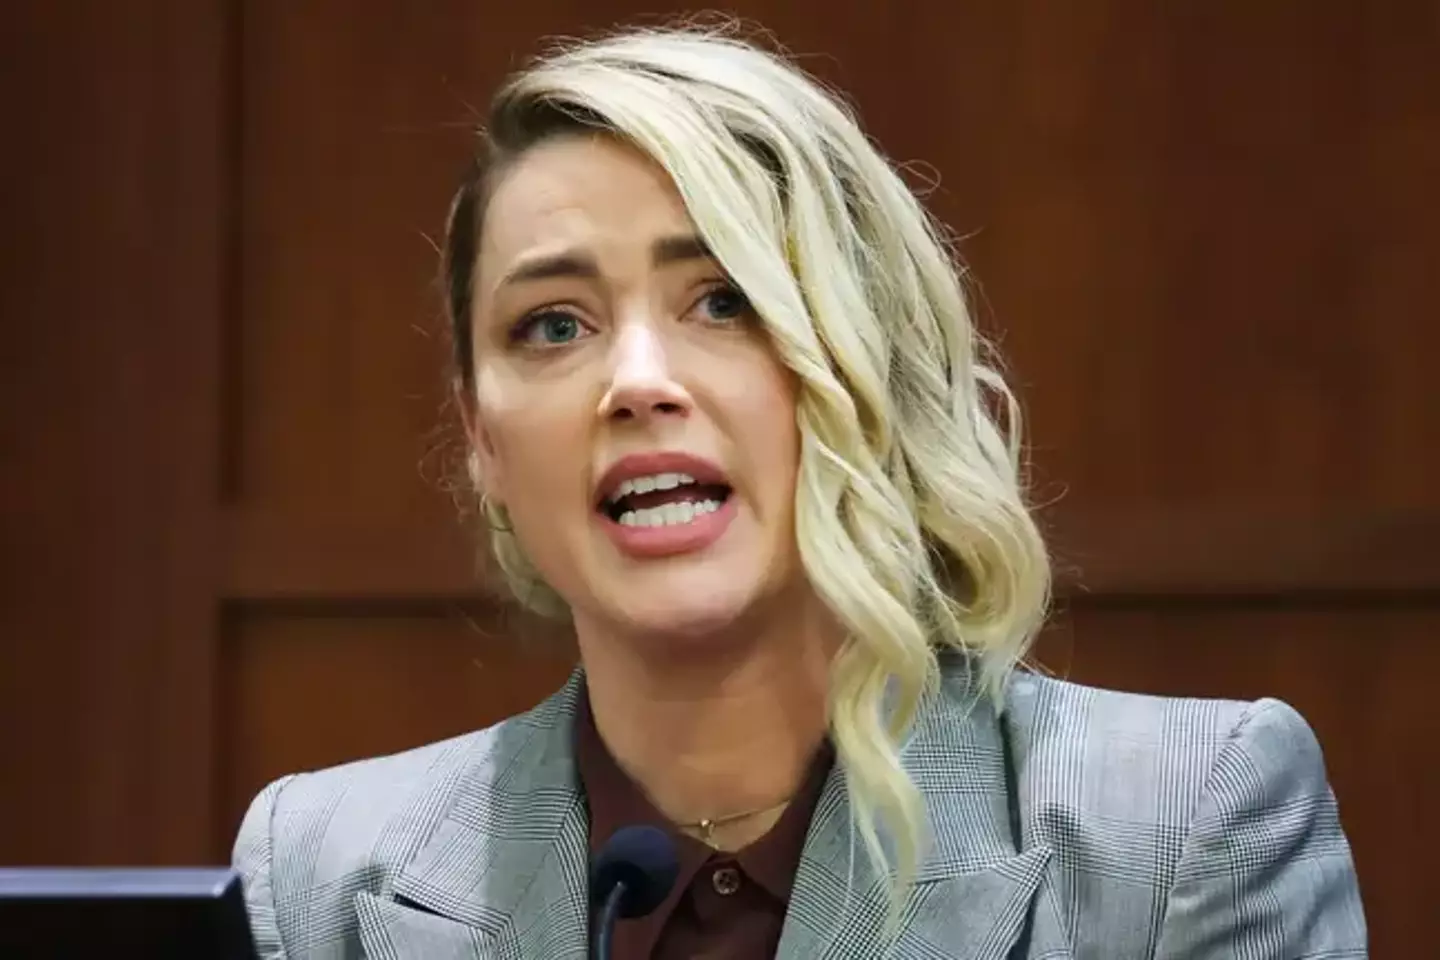 Amber Heard was ordered to pay Johnny Depp over $10m in damages.